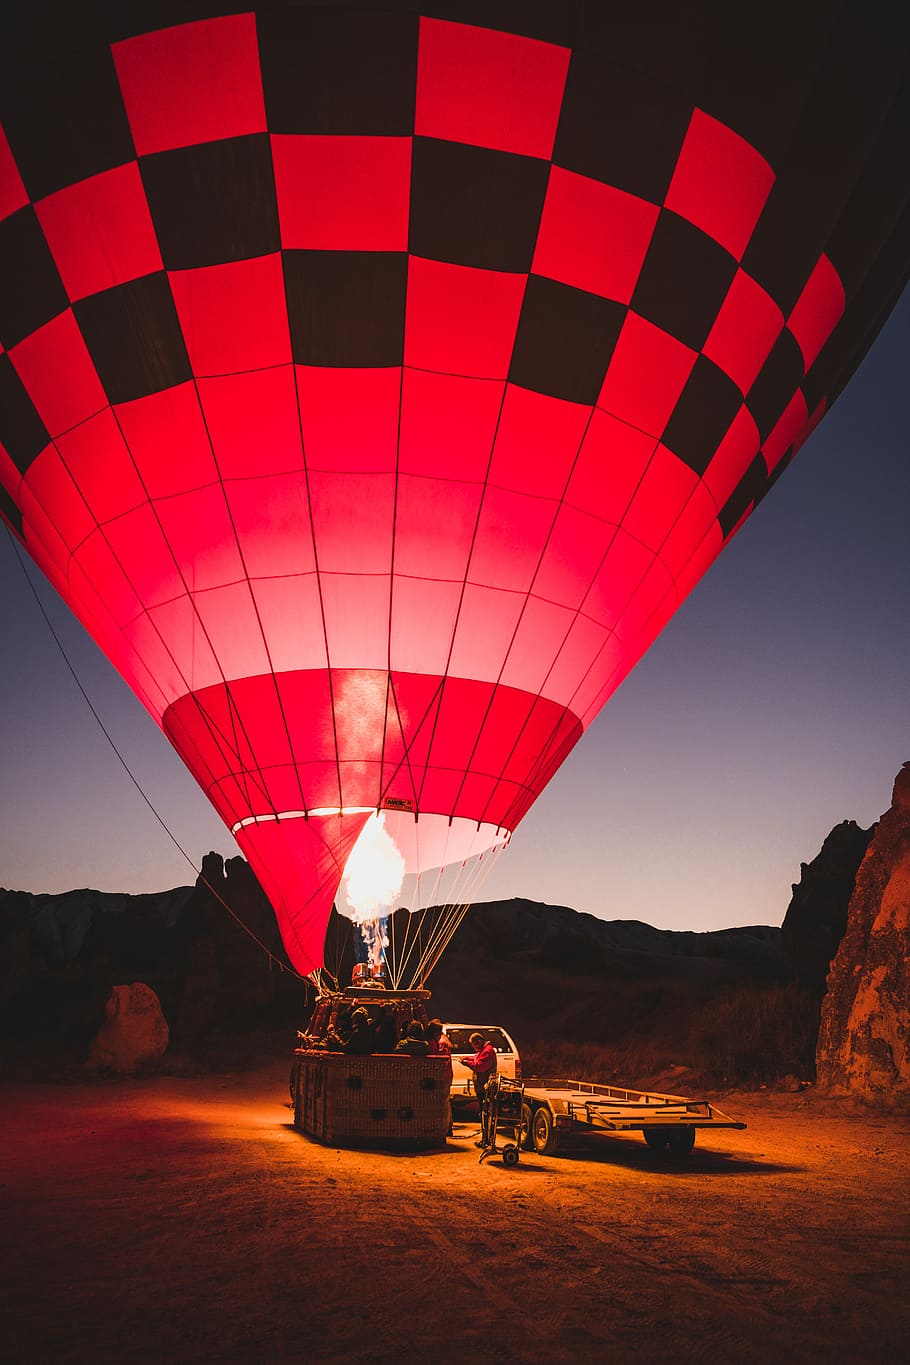 A hot air balloon is being inflated at night - Hot air balloons